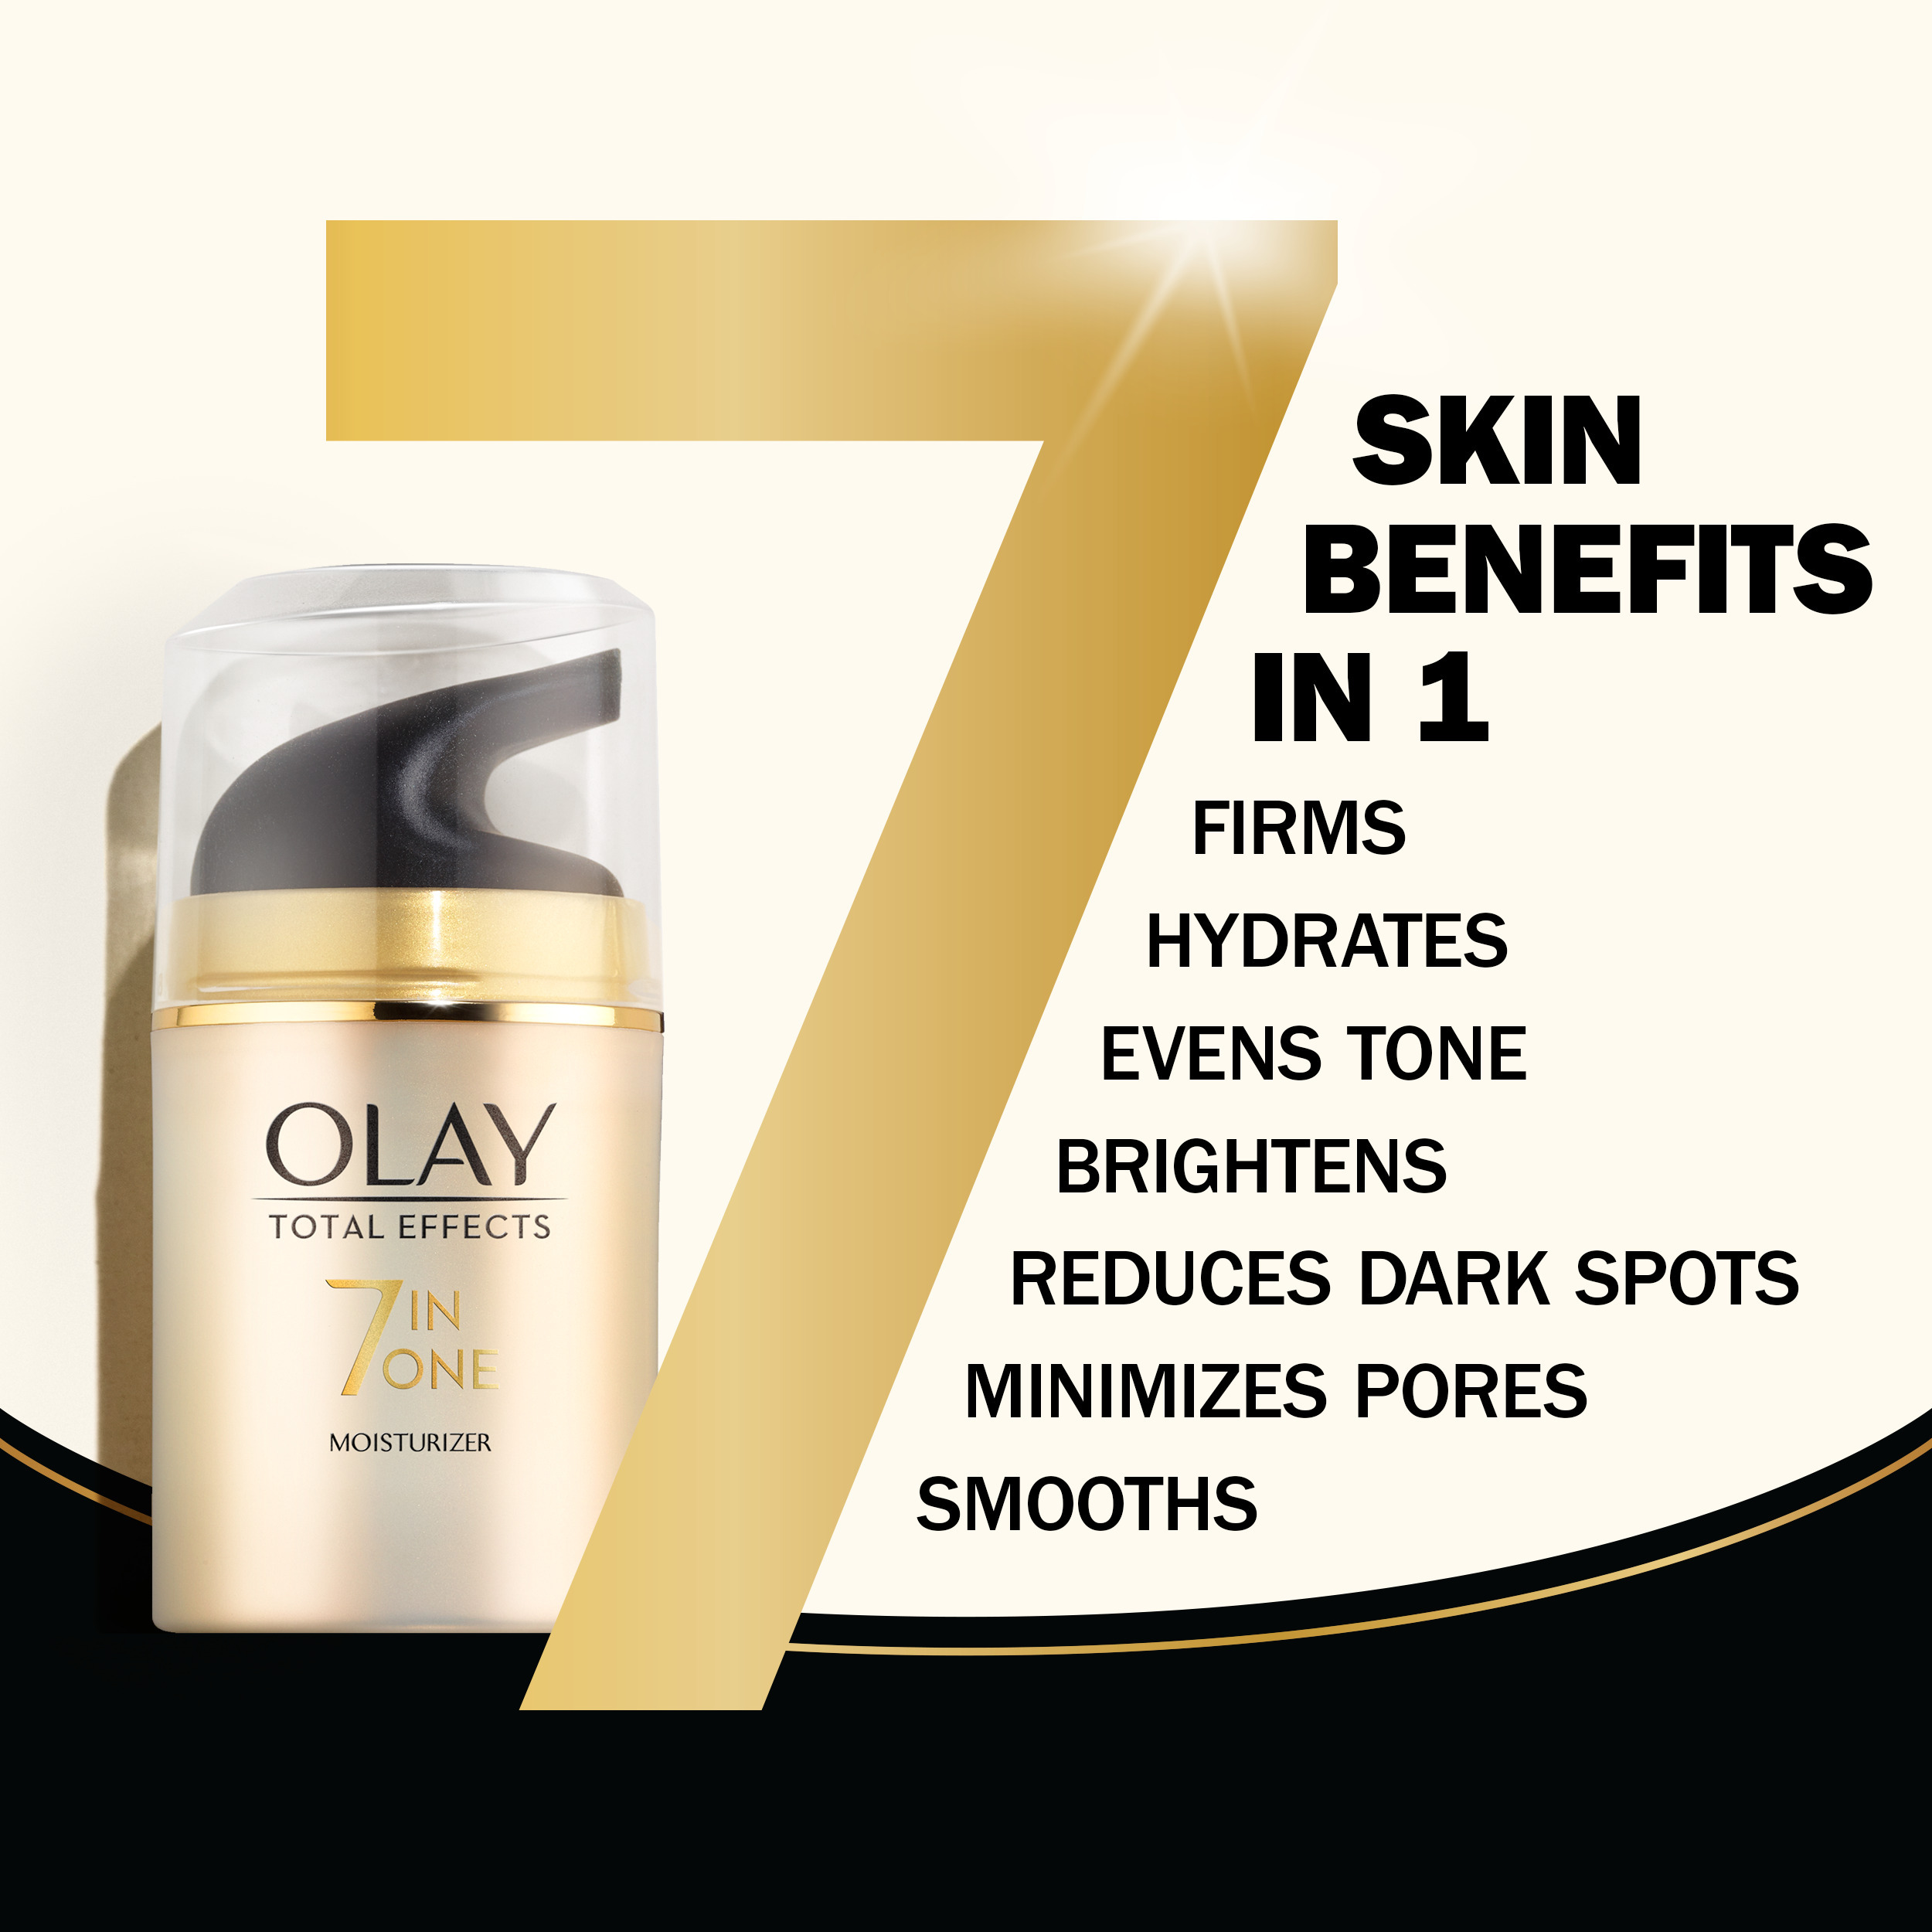 Olay Total Effects Face Moisturizer, All Skin Types, Reduces Enlarged Pores, 1.7 fl oz - image 3 of 12